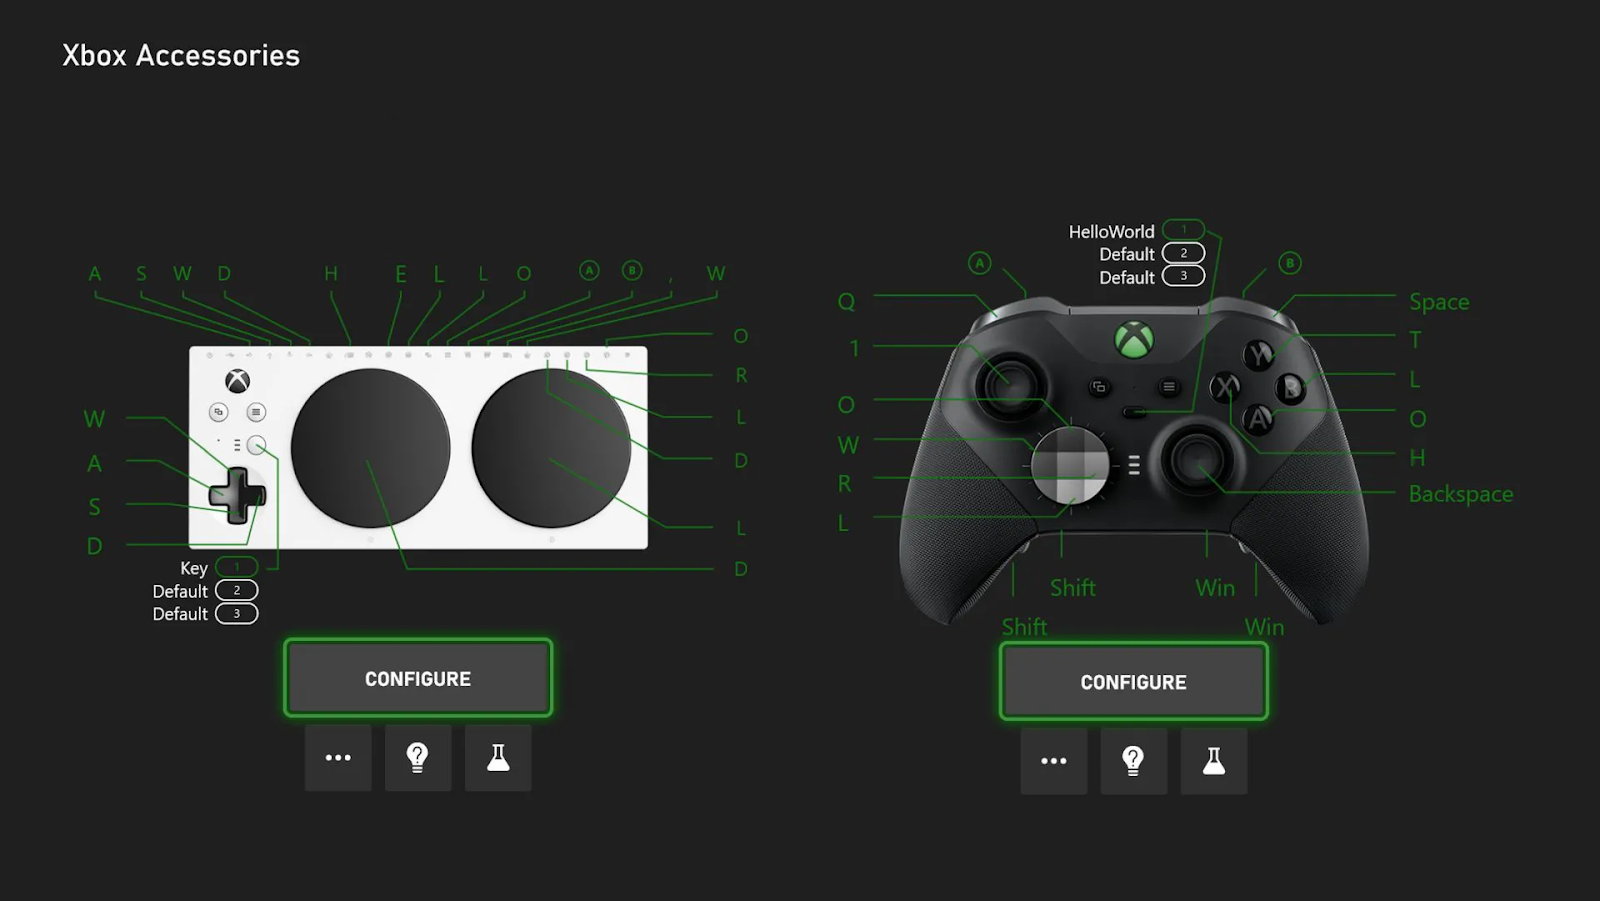 Xbox October Update - Accessories App, Keyboard Mapping